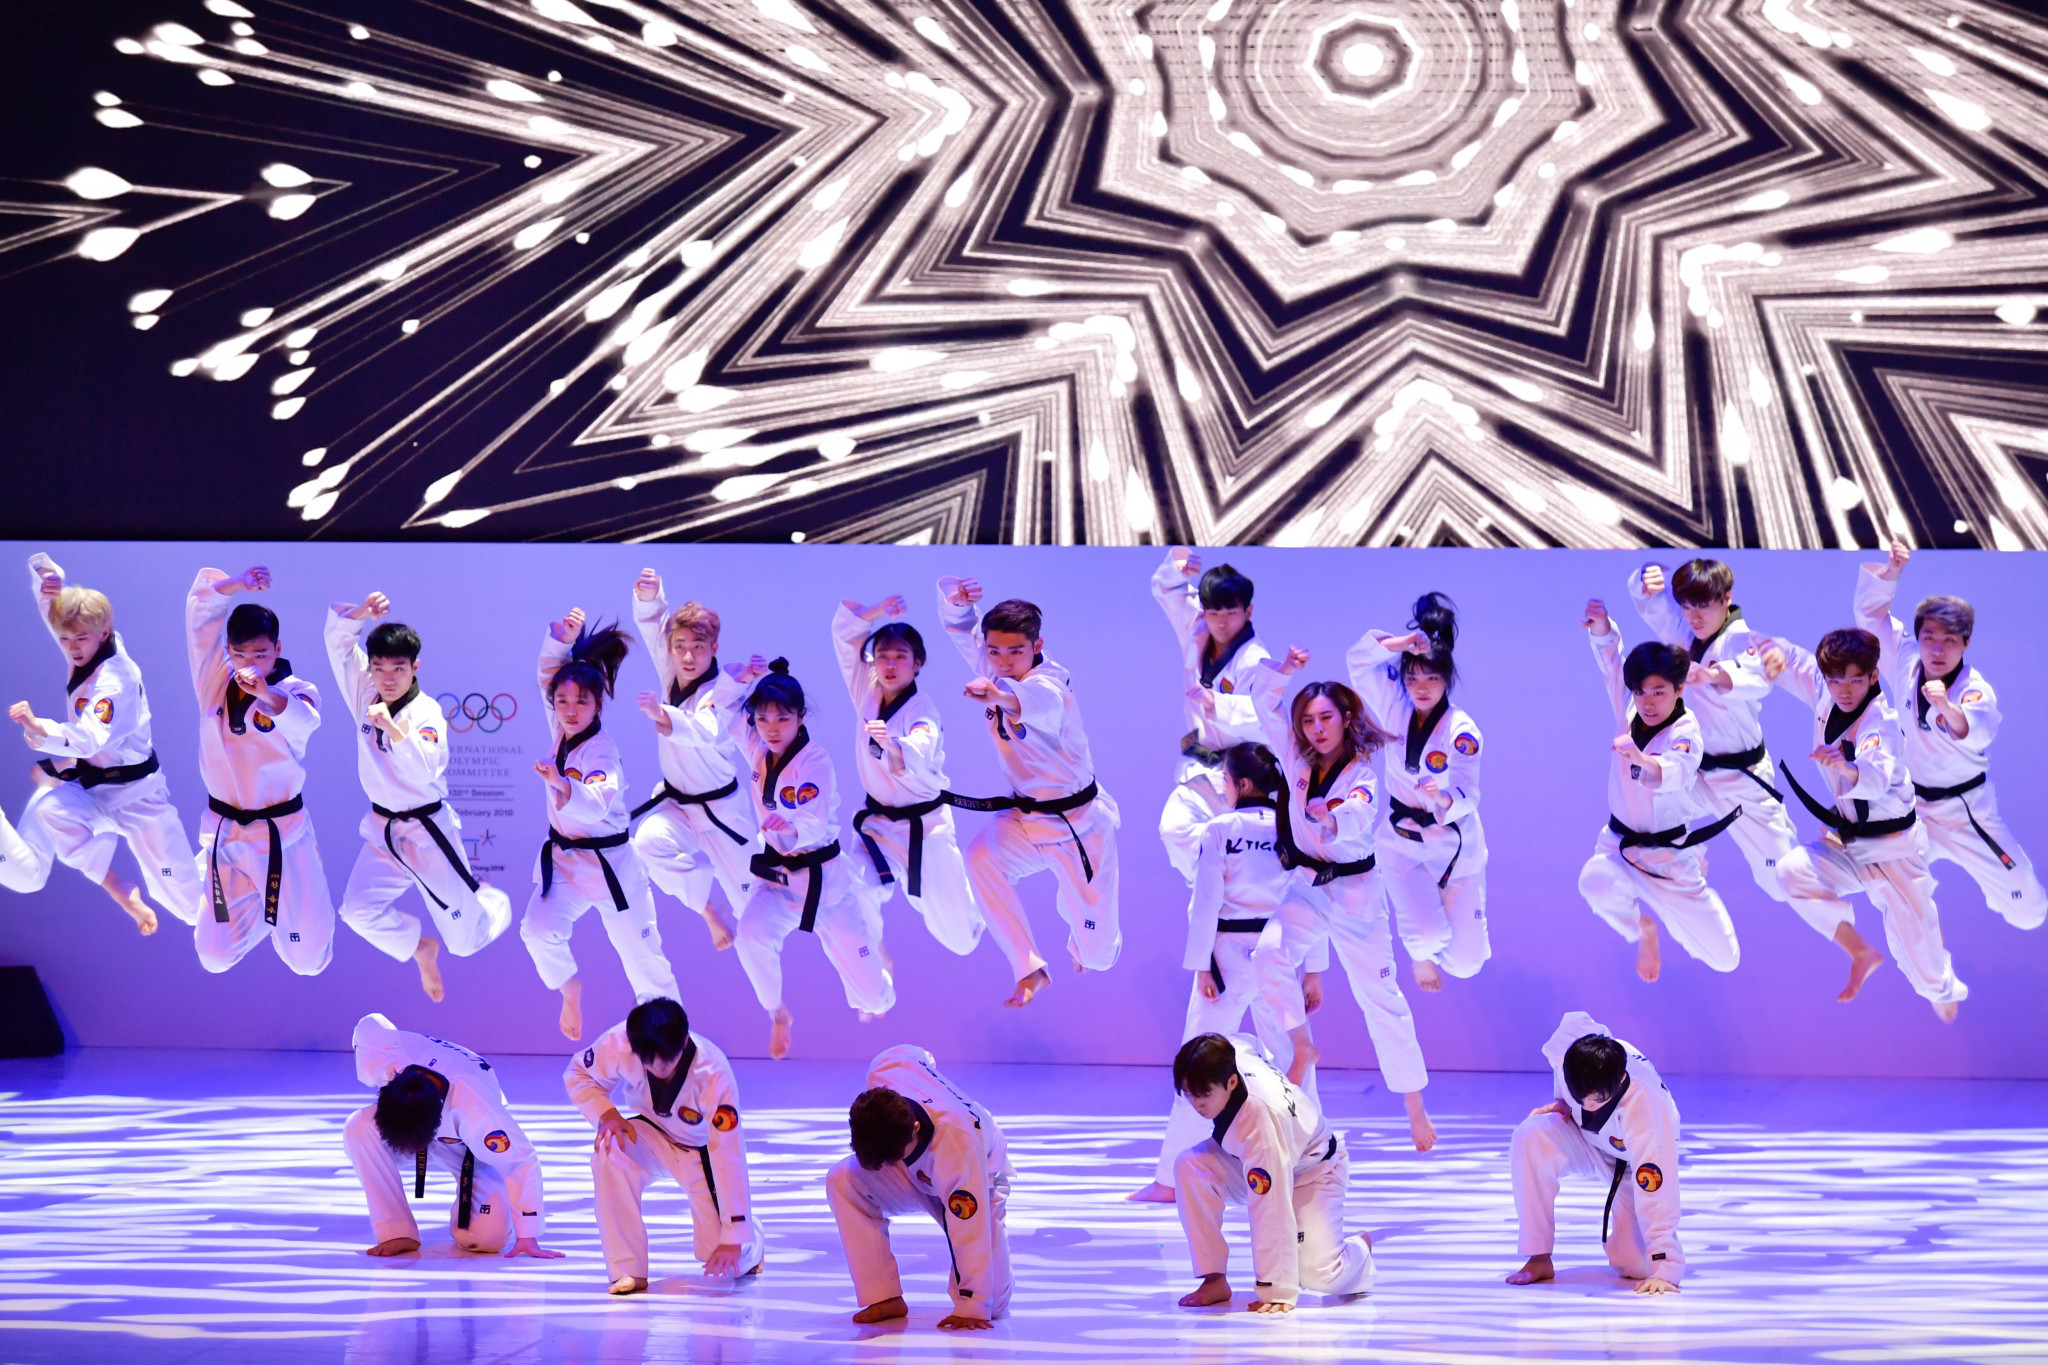 Korean cultural performances took place during the Opening Ceremony of the IOC Session after the speeches ©Getty Images